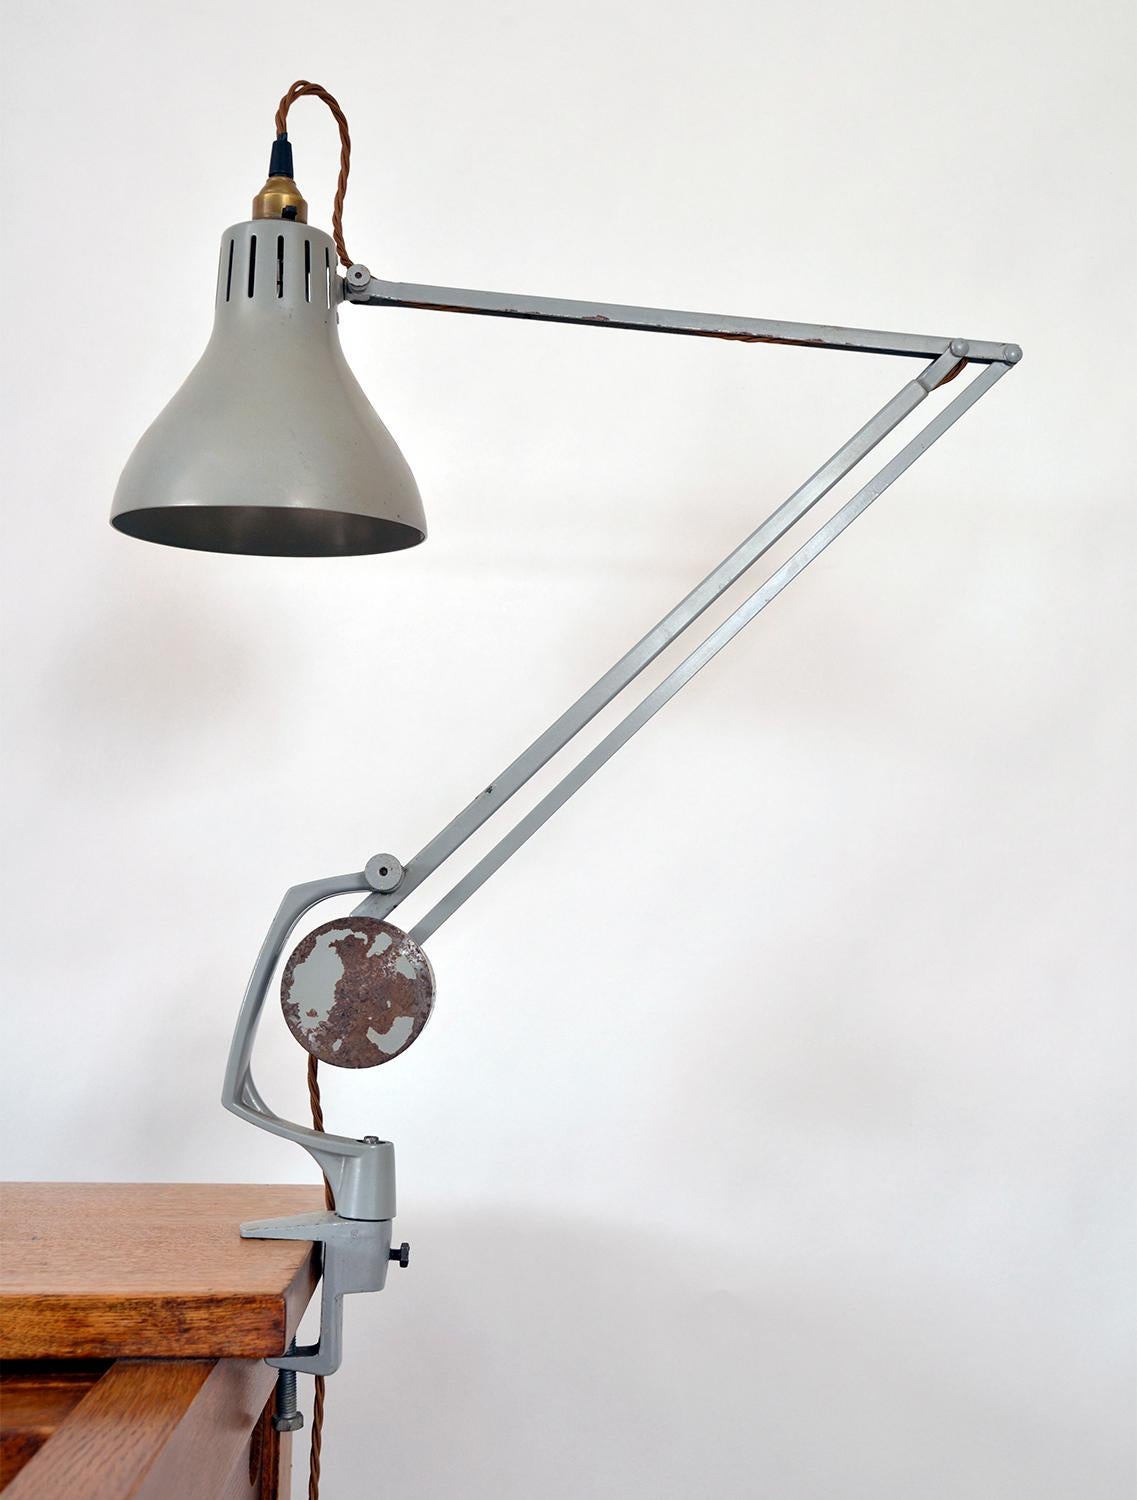 The Hadrill and Horstmann ‘Simplus’ desk mounted lamp – also known as the 'Roller' – was the architects and engineers prized possession of the era. 
A superb piece of Great British engineering, this articulated lamp simply clamps to a desk,